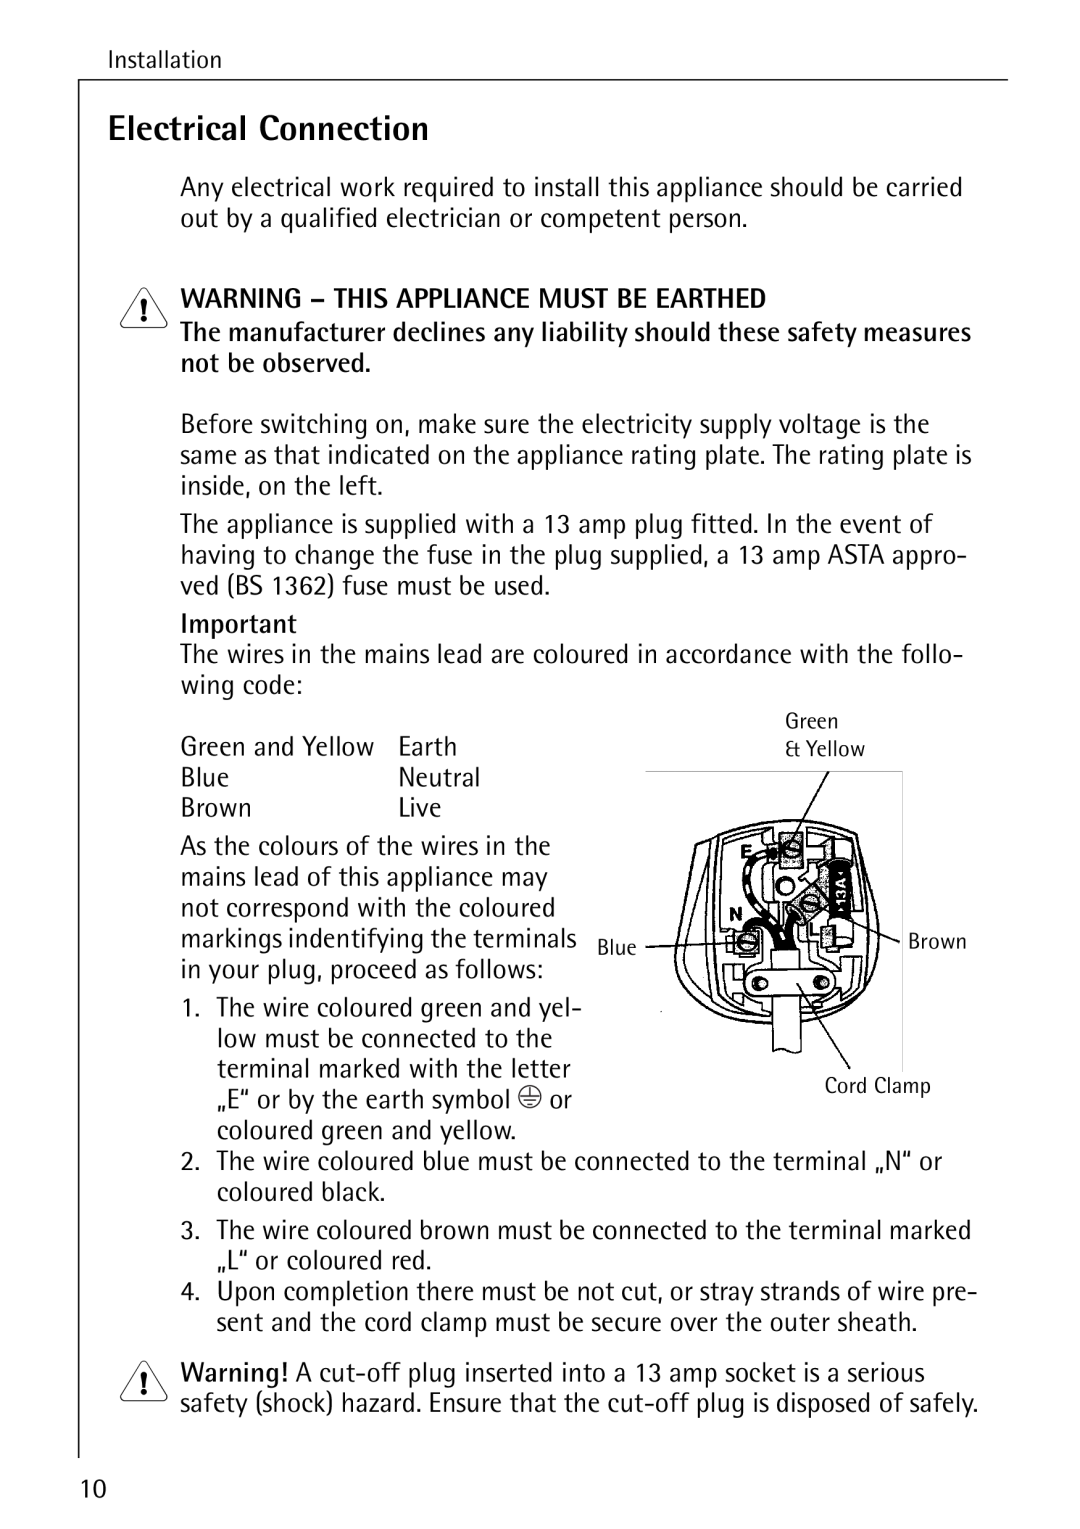 Electrolux Integrated operating instructions Electrical Connection, Warning - This Appliance Must Be Earthed 